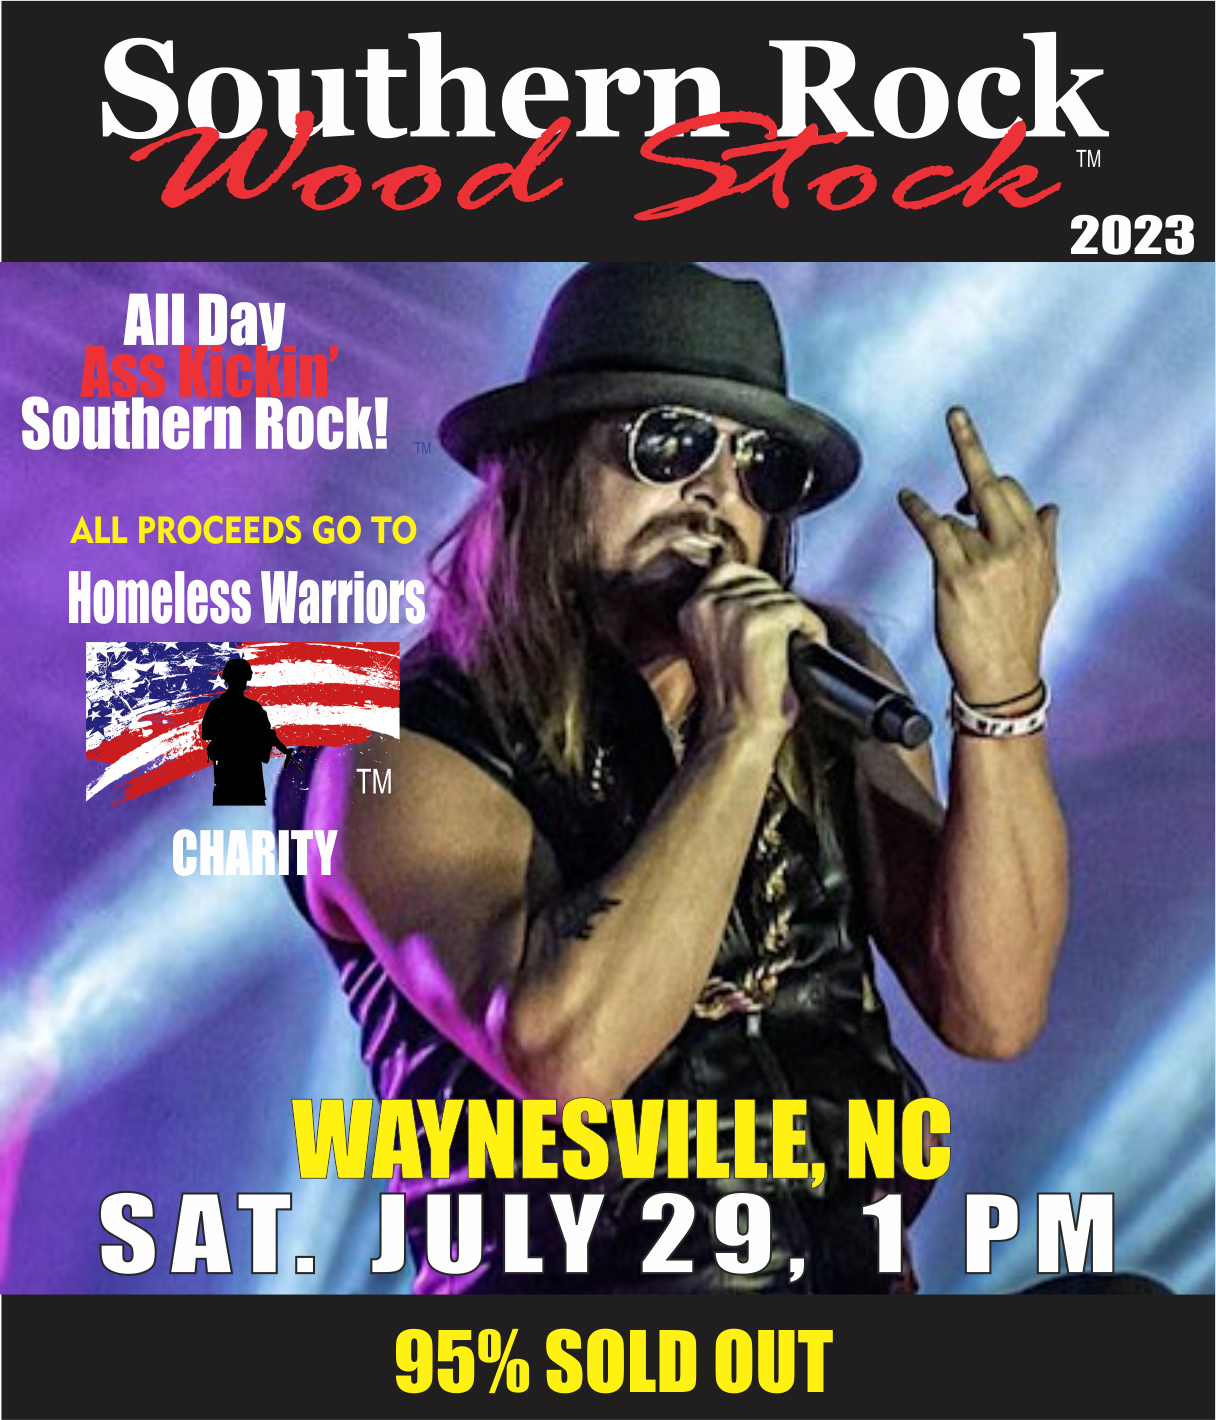 Southern Rock Wood Stock 2023 Waynesville, NC on Jul 29, 13:00@Smoky Mountain Event Center - Buy tickets and Get information on www.southernrockwoodstock.com southernrockwoodstock